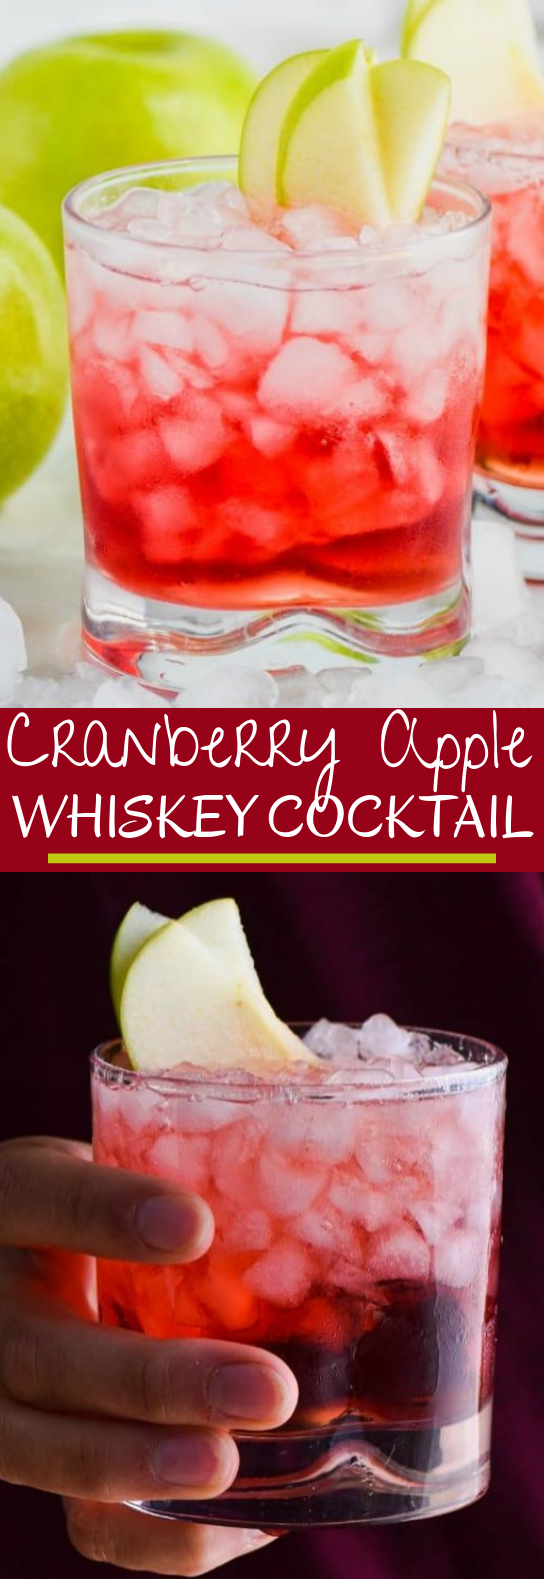 Cranberry Apple Whiskey Cocktail #drinks #cocktails